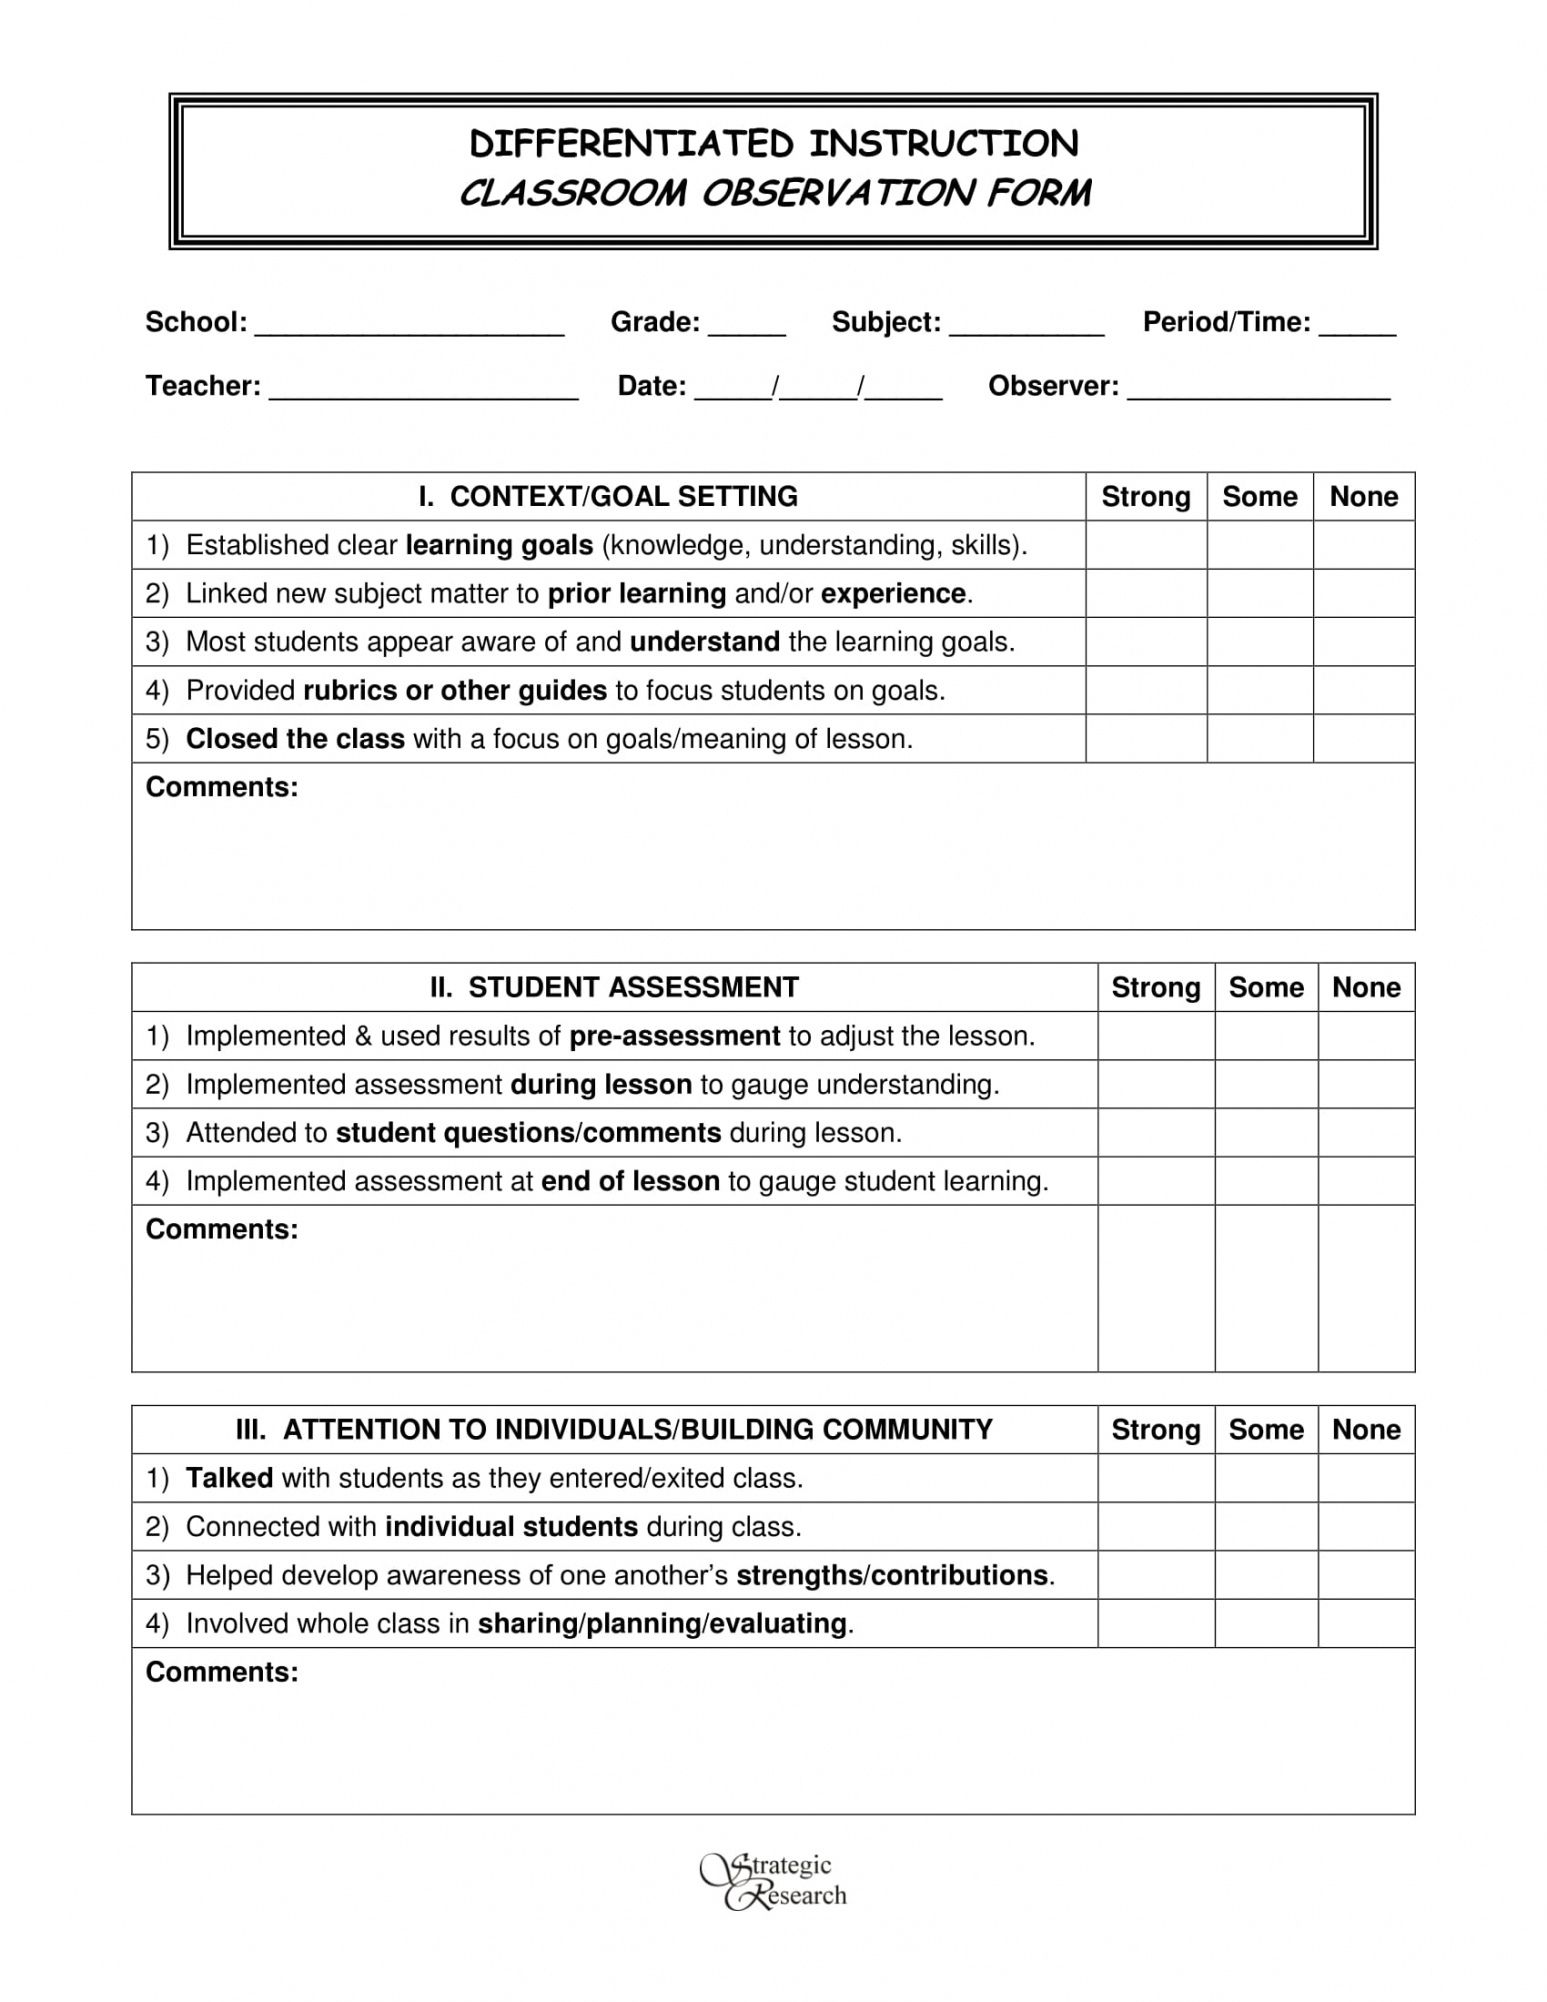 sample free 5 classroom observation forms in pdf  ms word  excel student observation form template doc